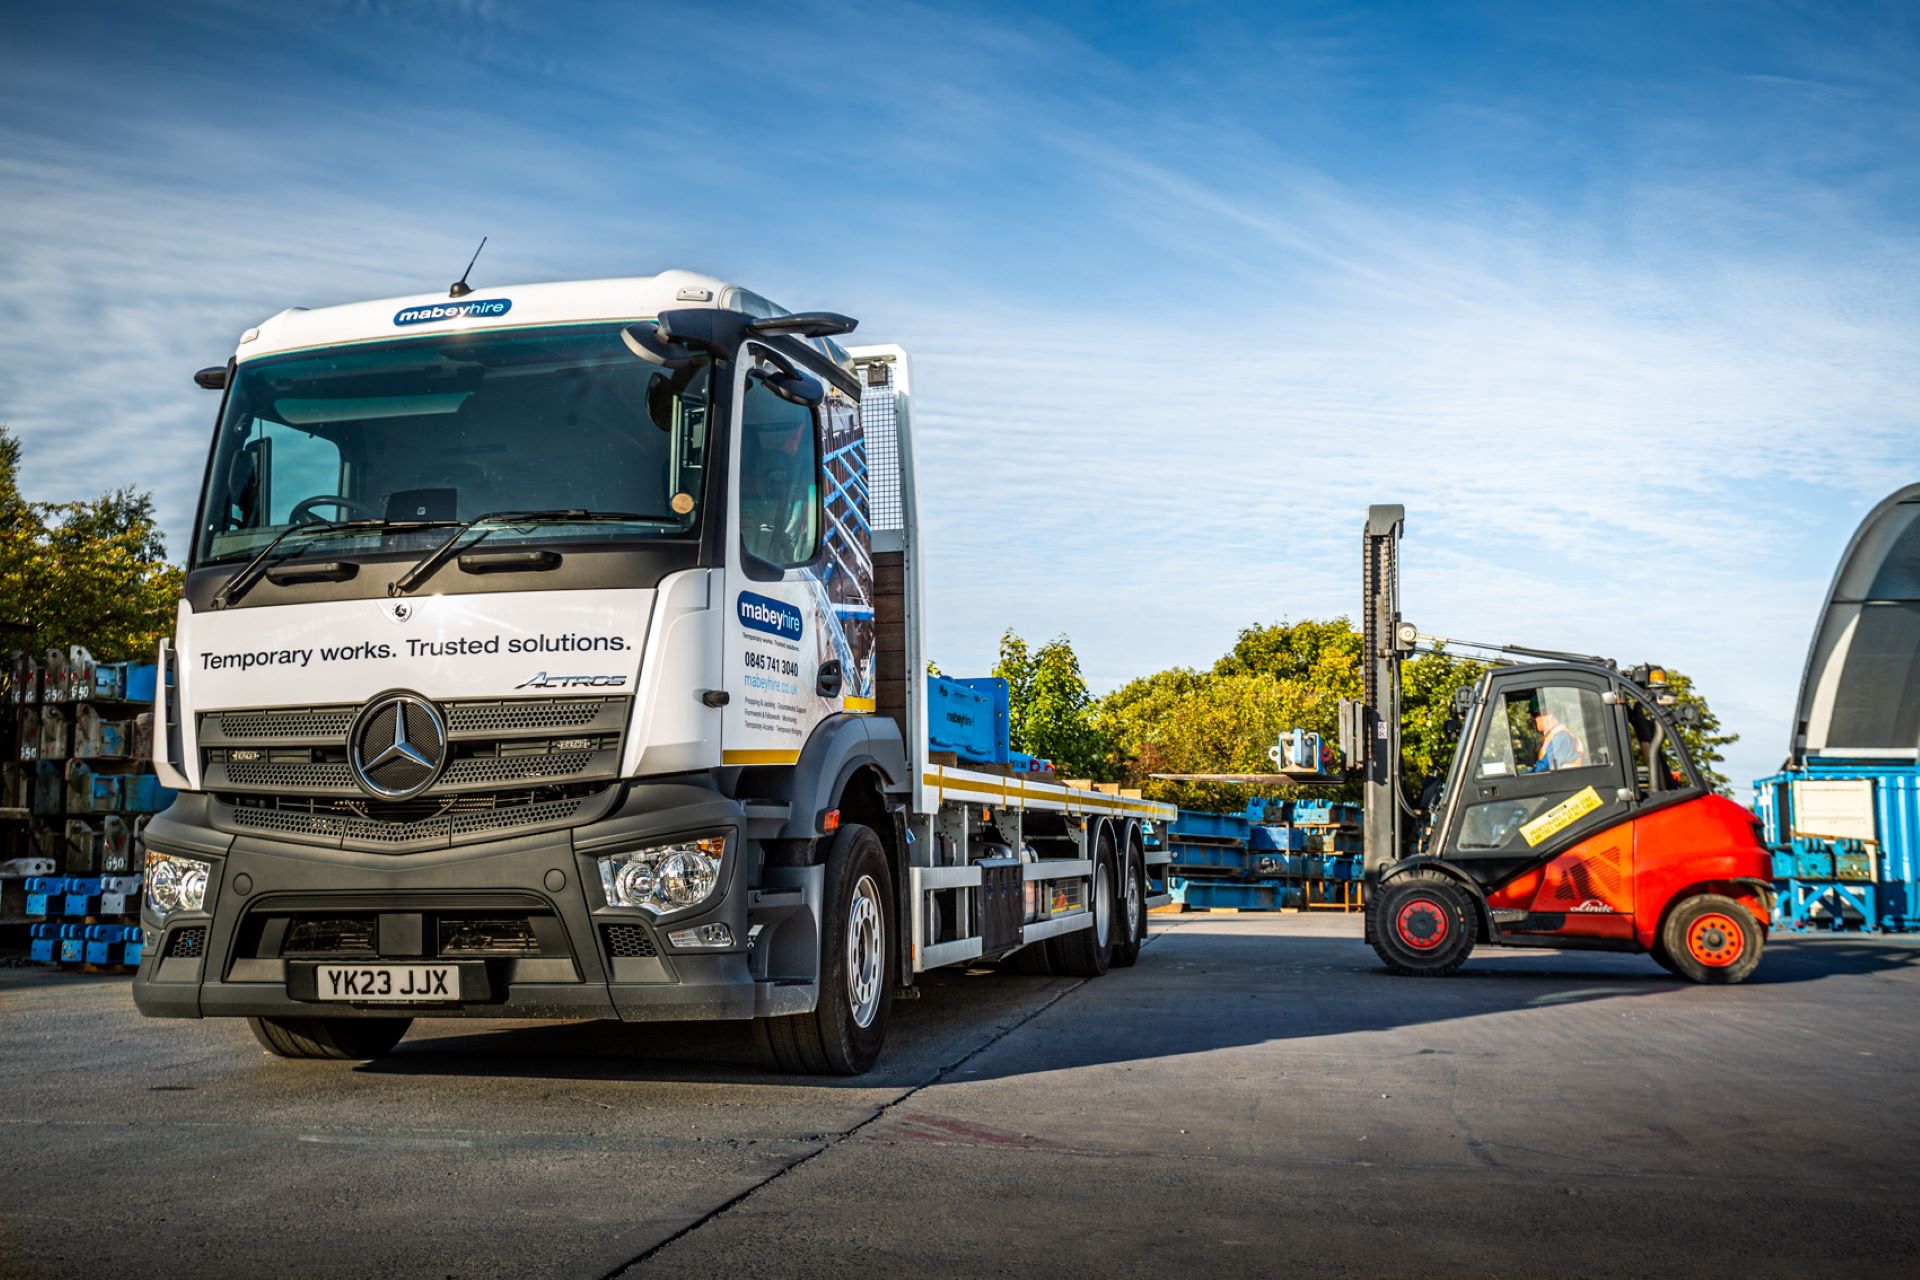 Mercedes-Benz safety makes Actros a definite winner for Mabey Hire